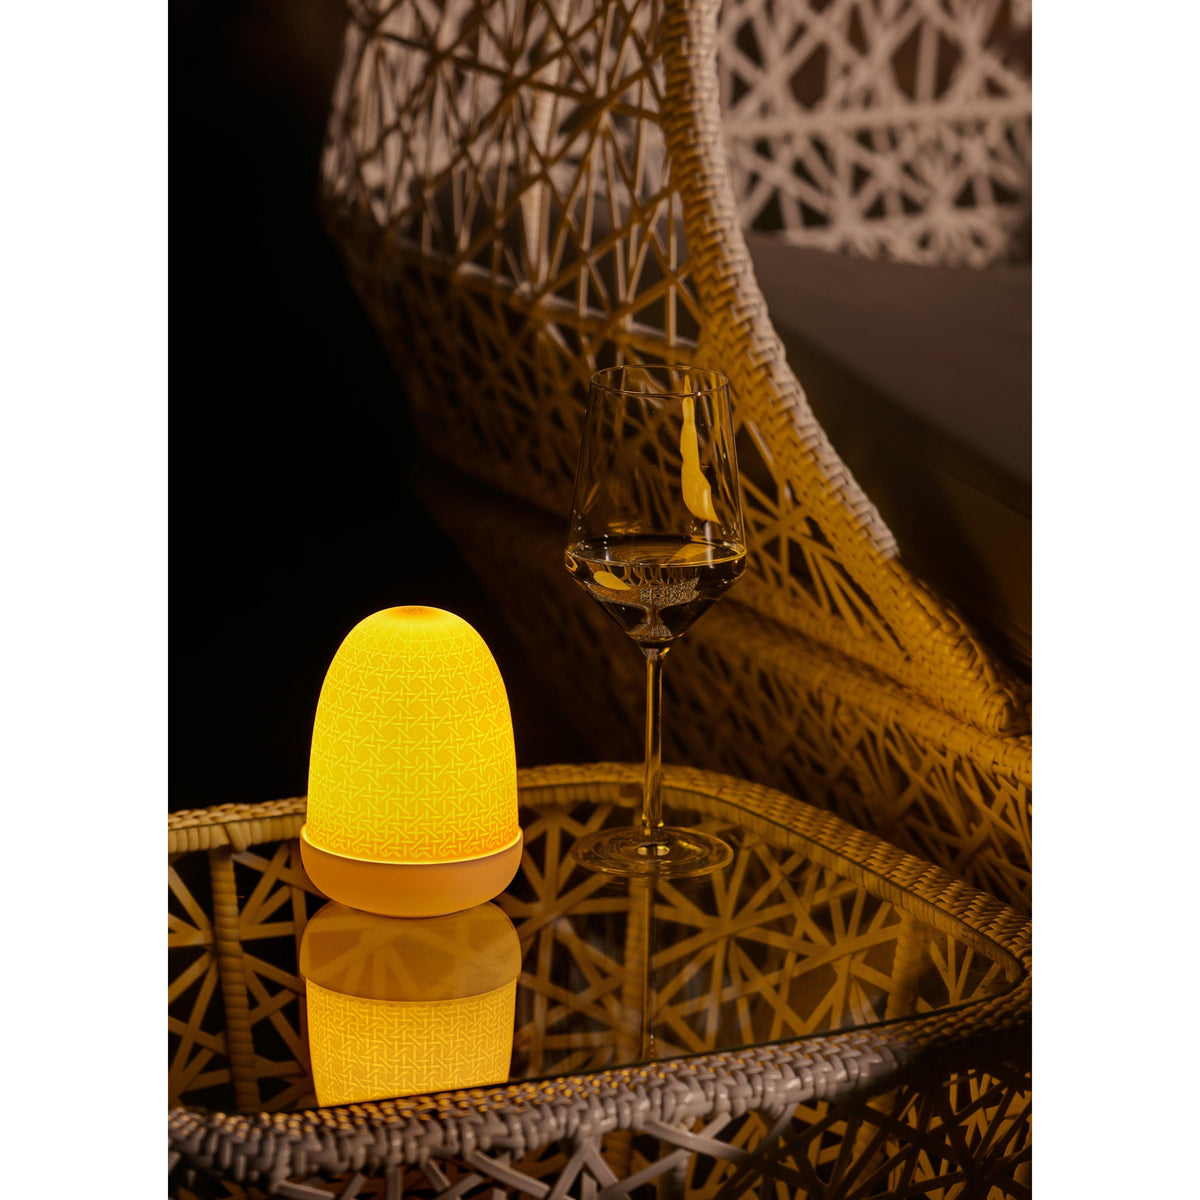 Lladro - Wicker Dome Table Lamp - 01023889 | Montreal Lighting & Hardware